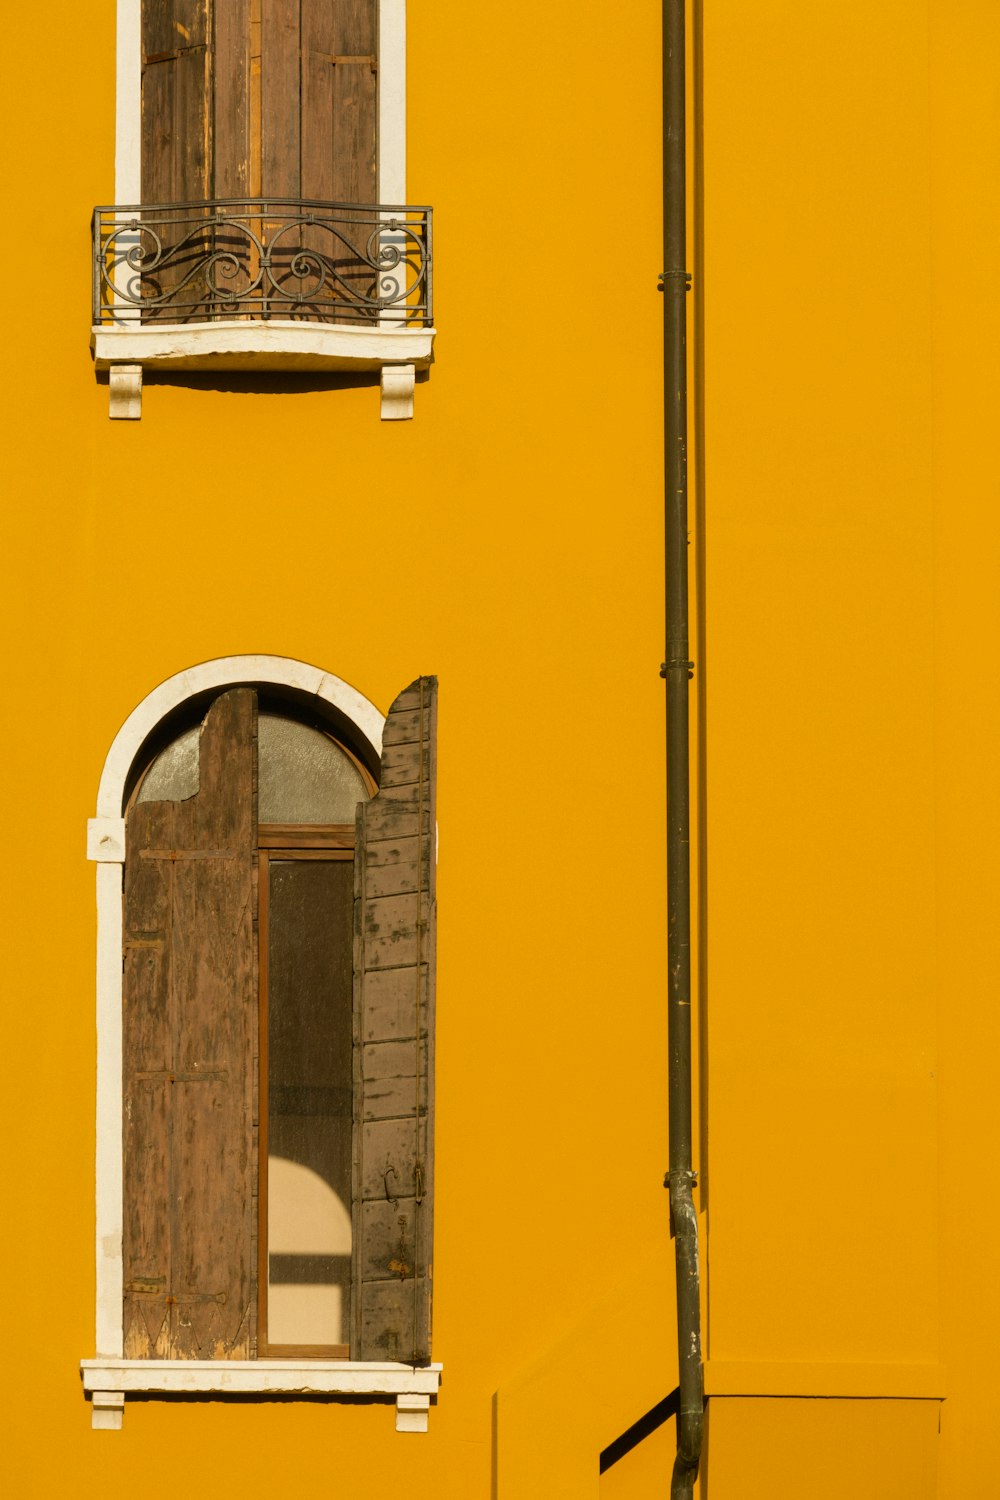 a yellow building with two windows and a street light